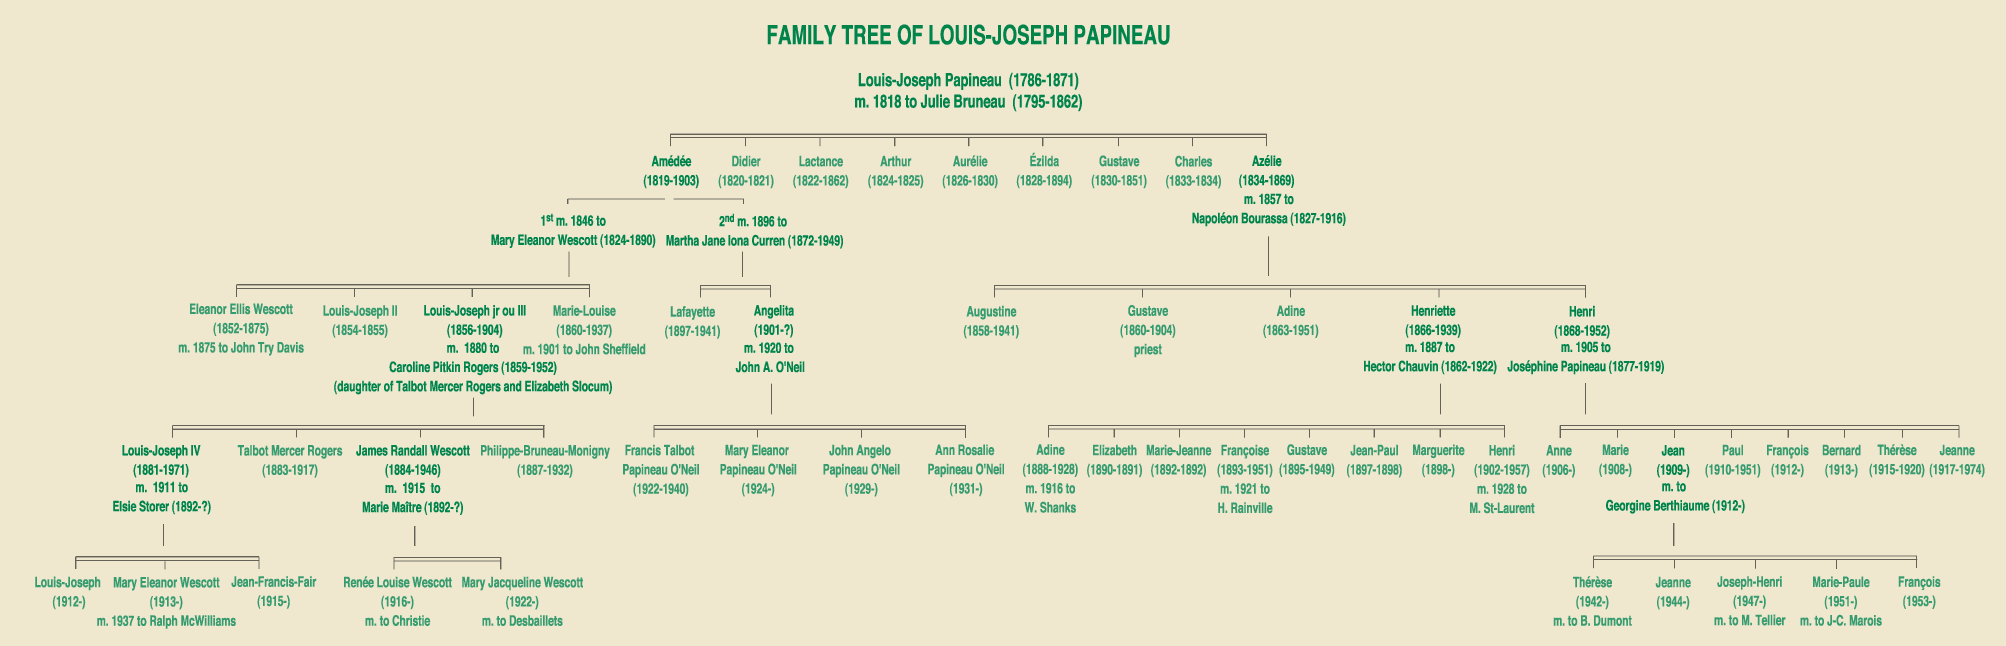 Papineau Familly Tree